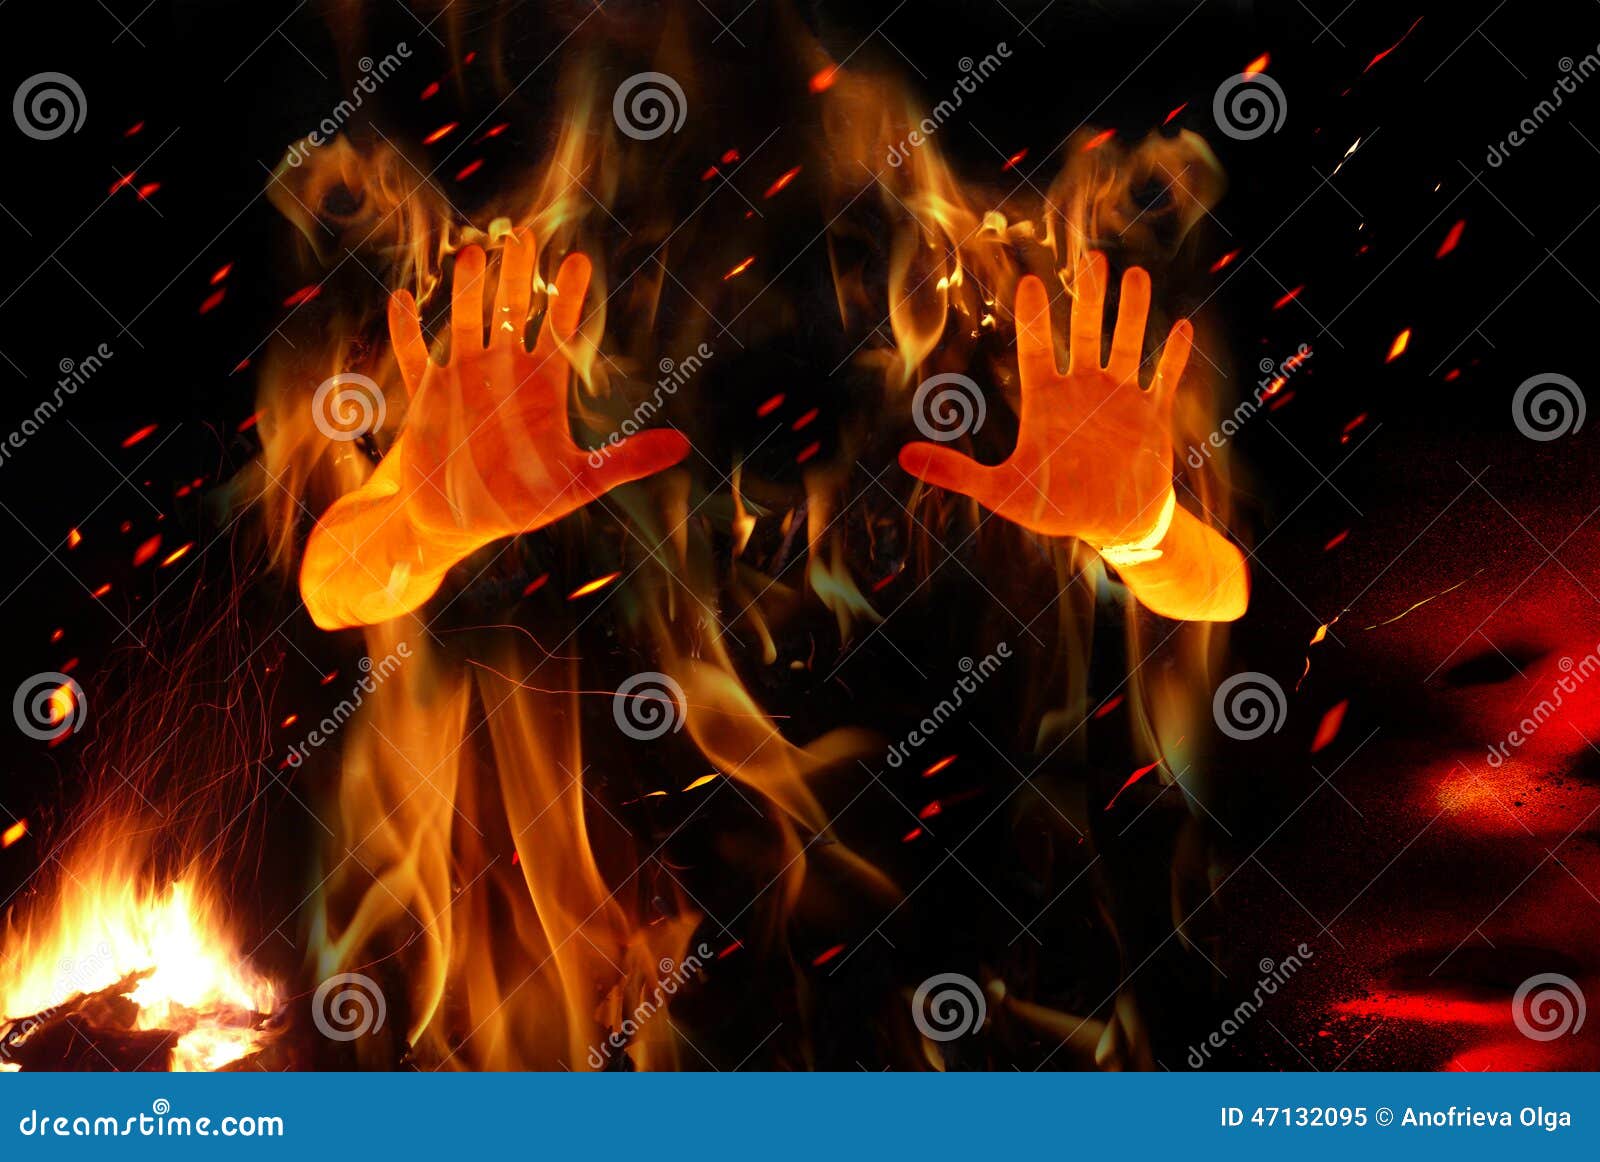 Person on fire stock image. Image of despair, gloom, fear - 47132095